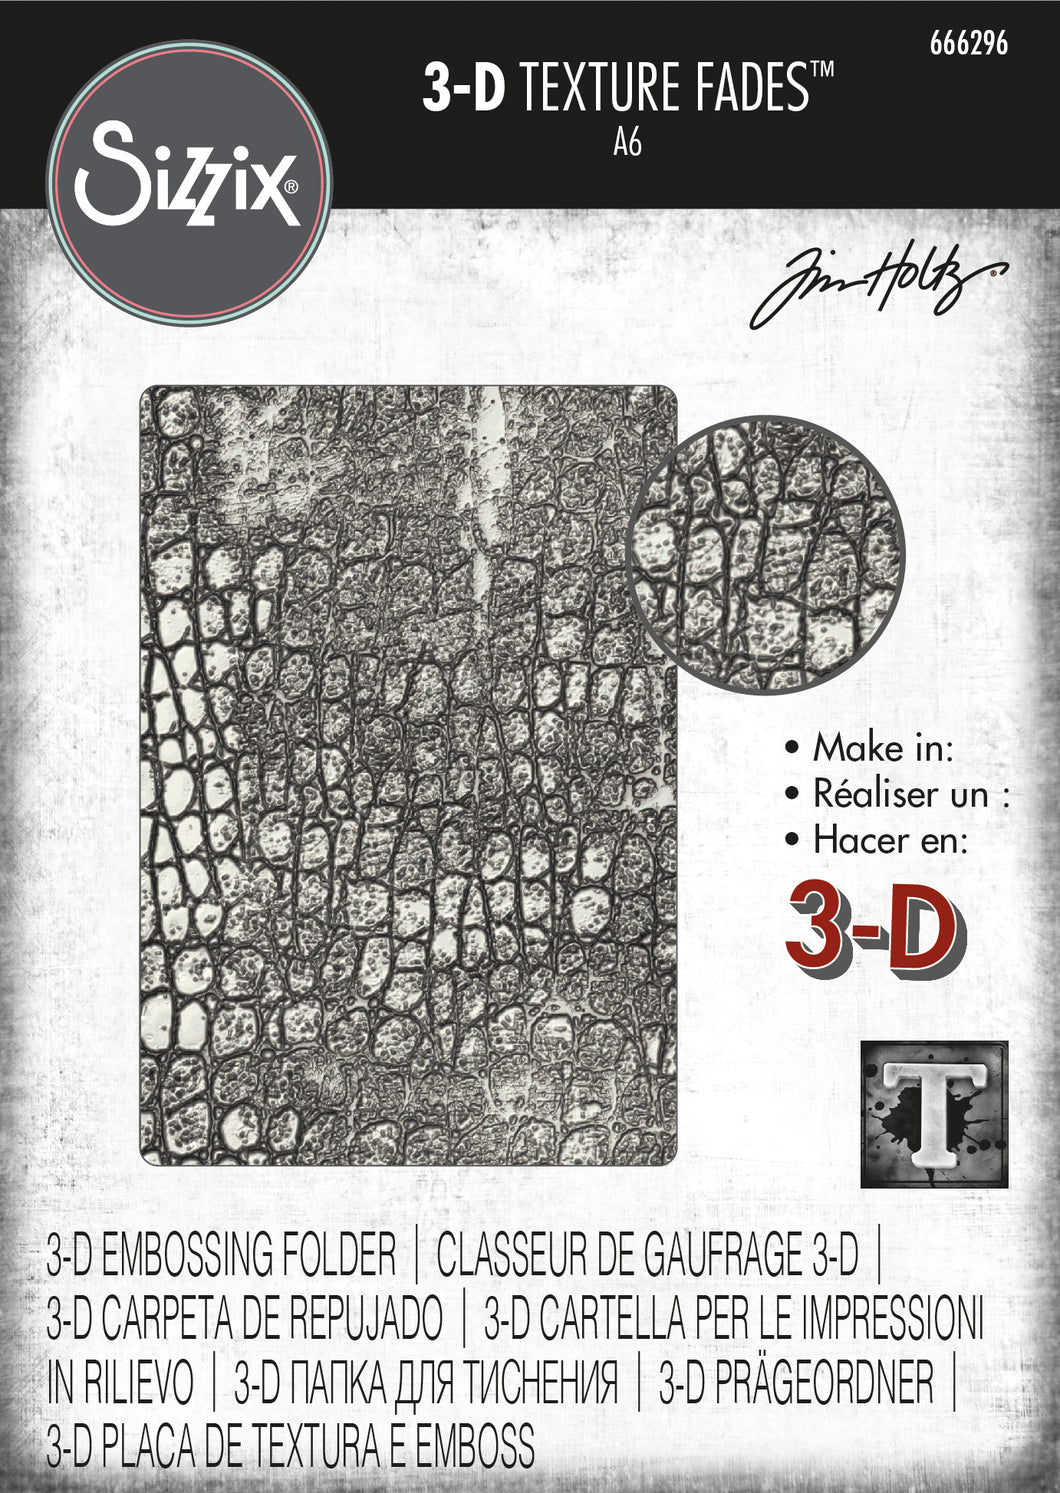 Sizzix 3-D Texture Fades Embossing Folder Reptile by Tim Holtz (666296)